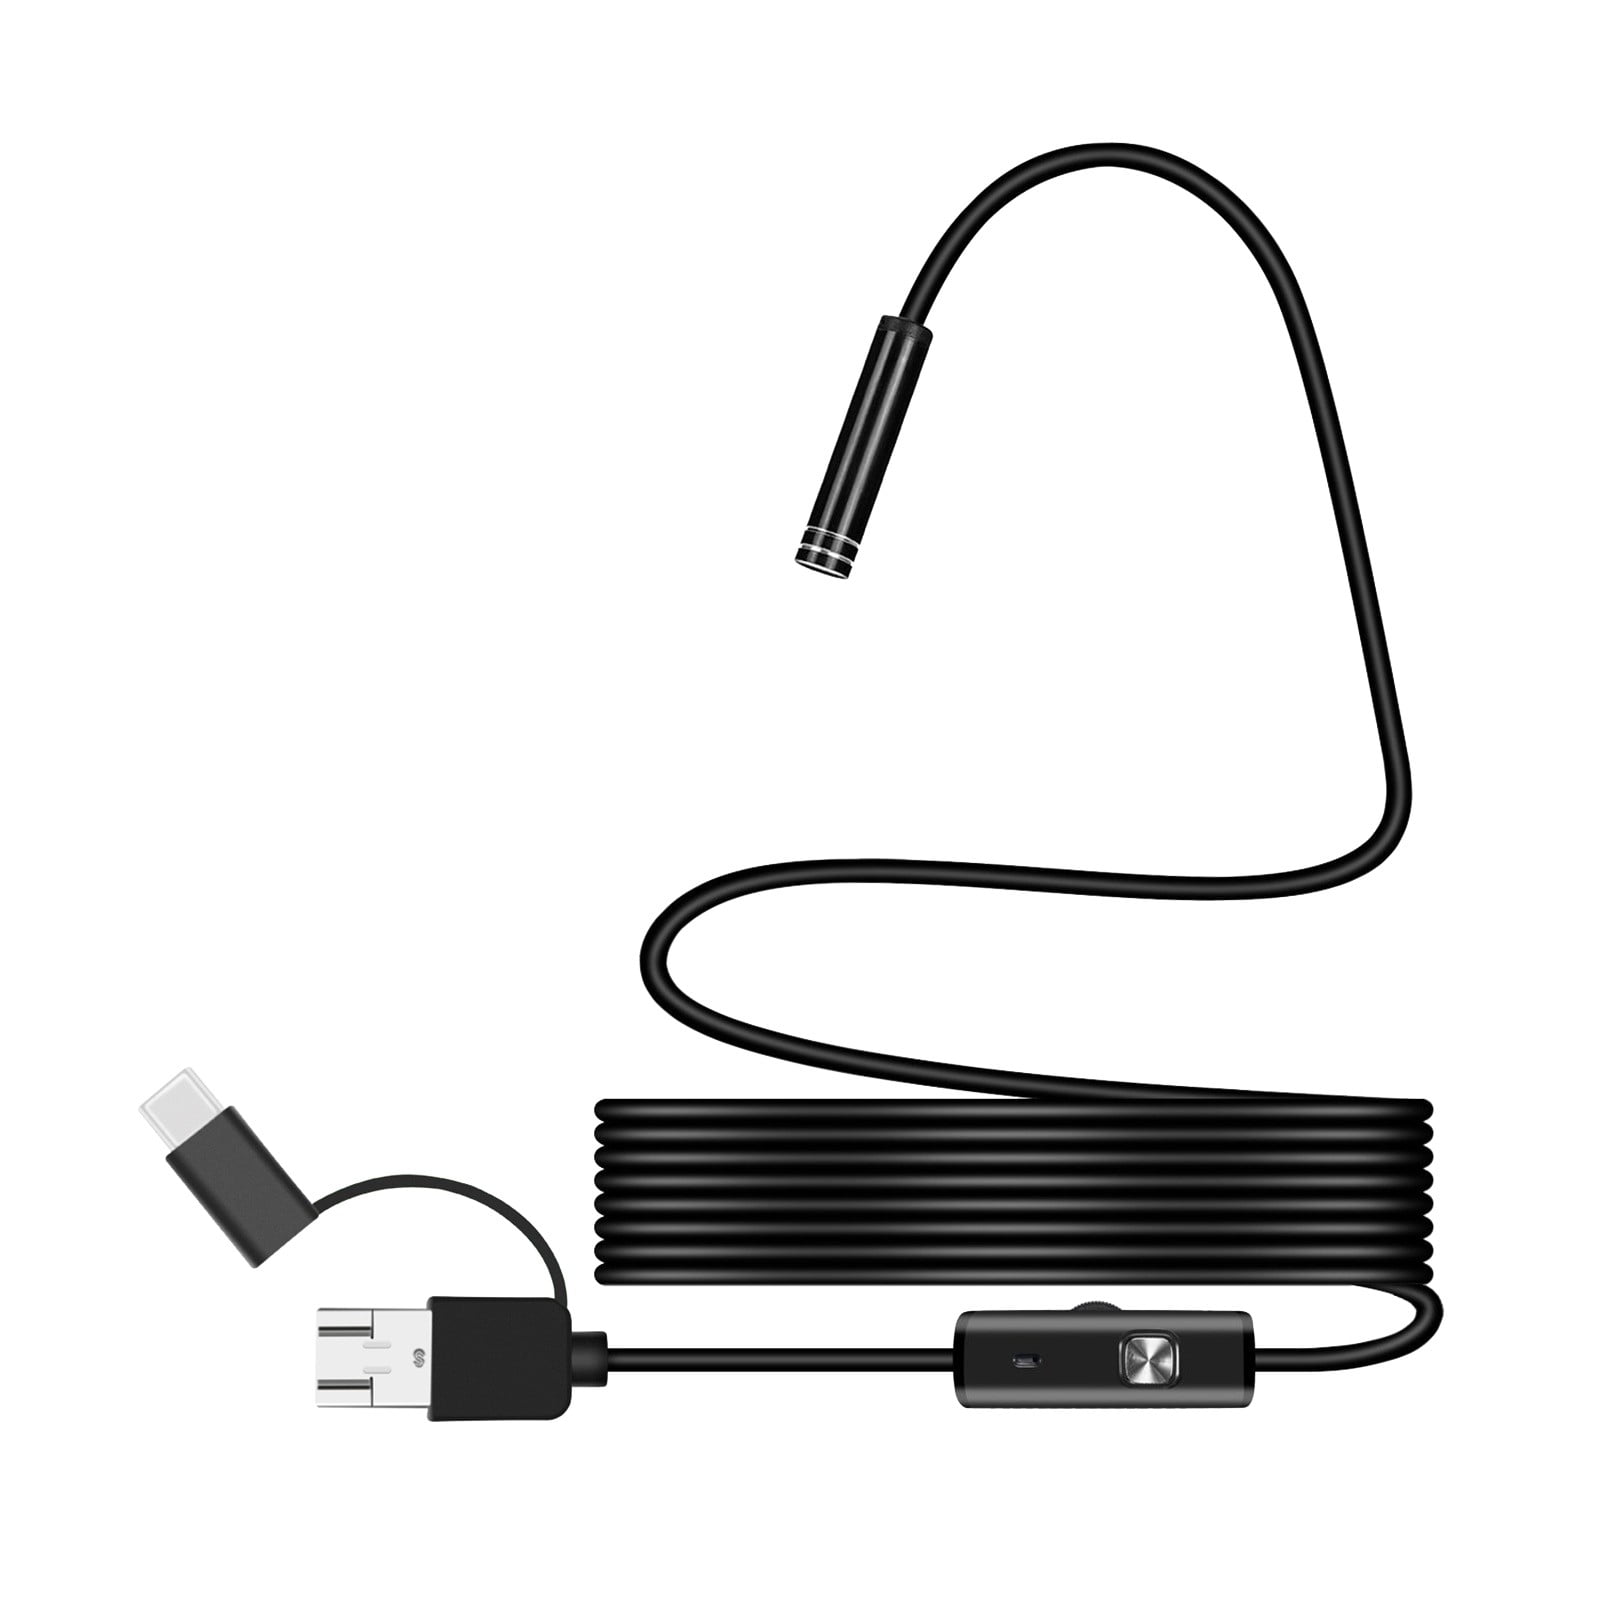 HD USB Type-c Endoscope Borescope Inspect Camera 3 in 1 for Android PC  5.5mm 